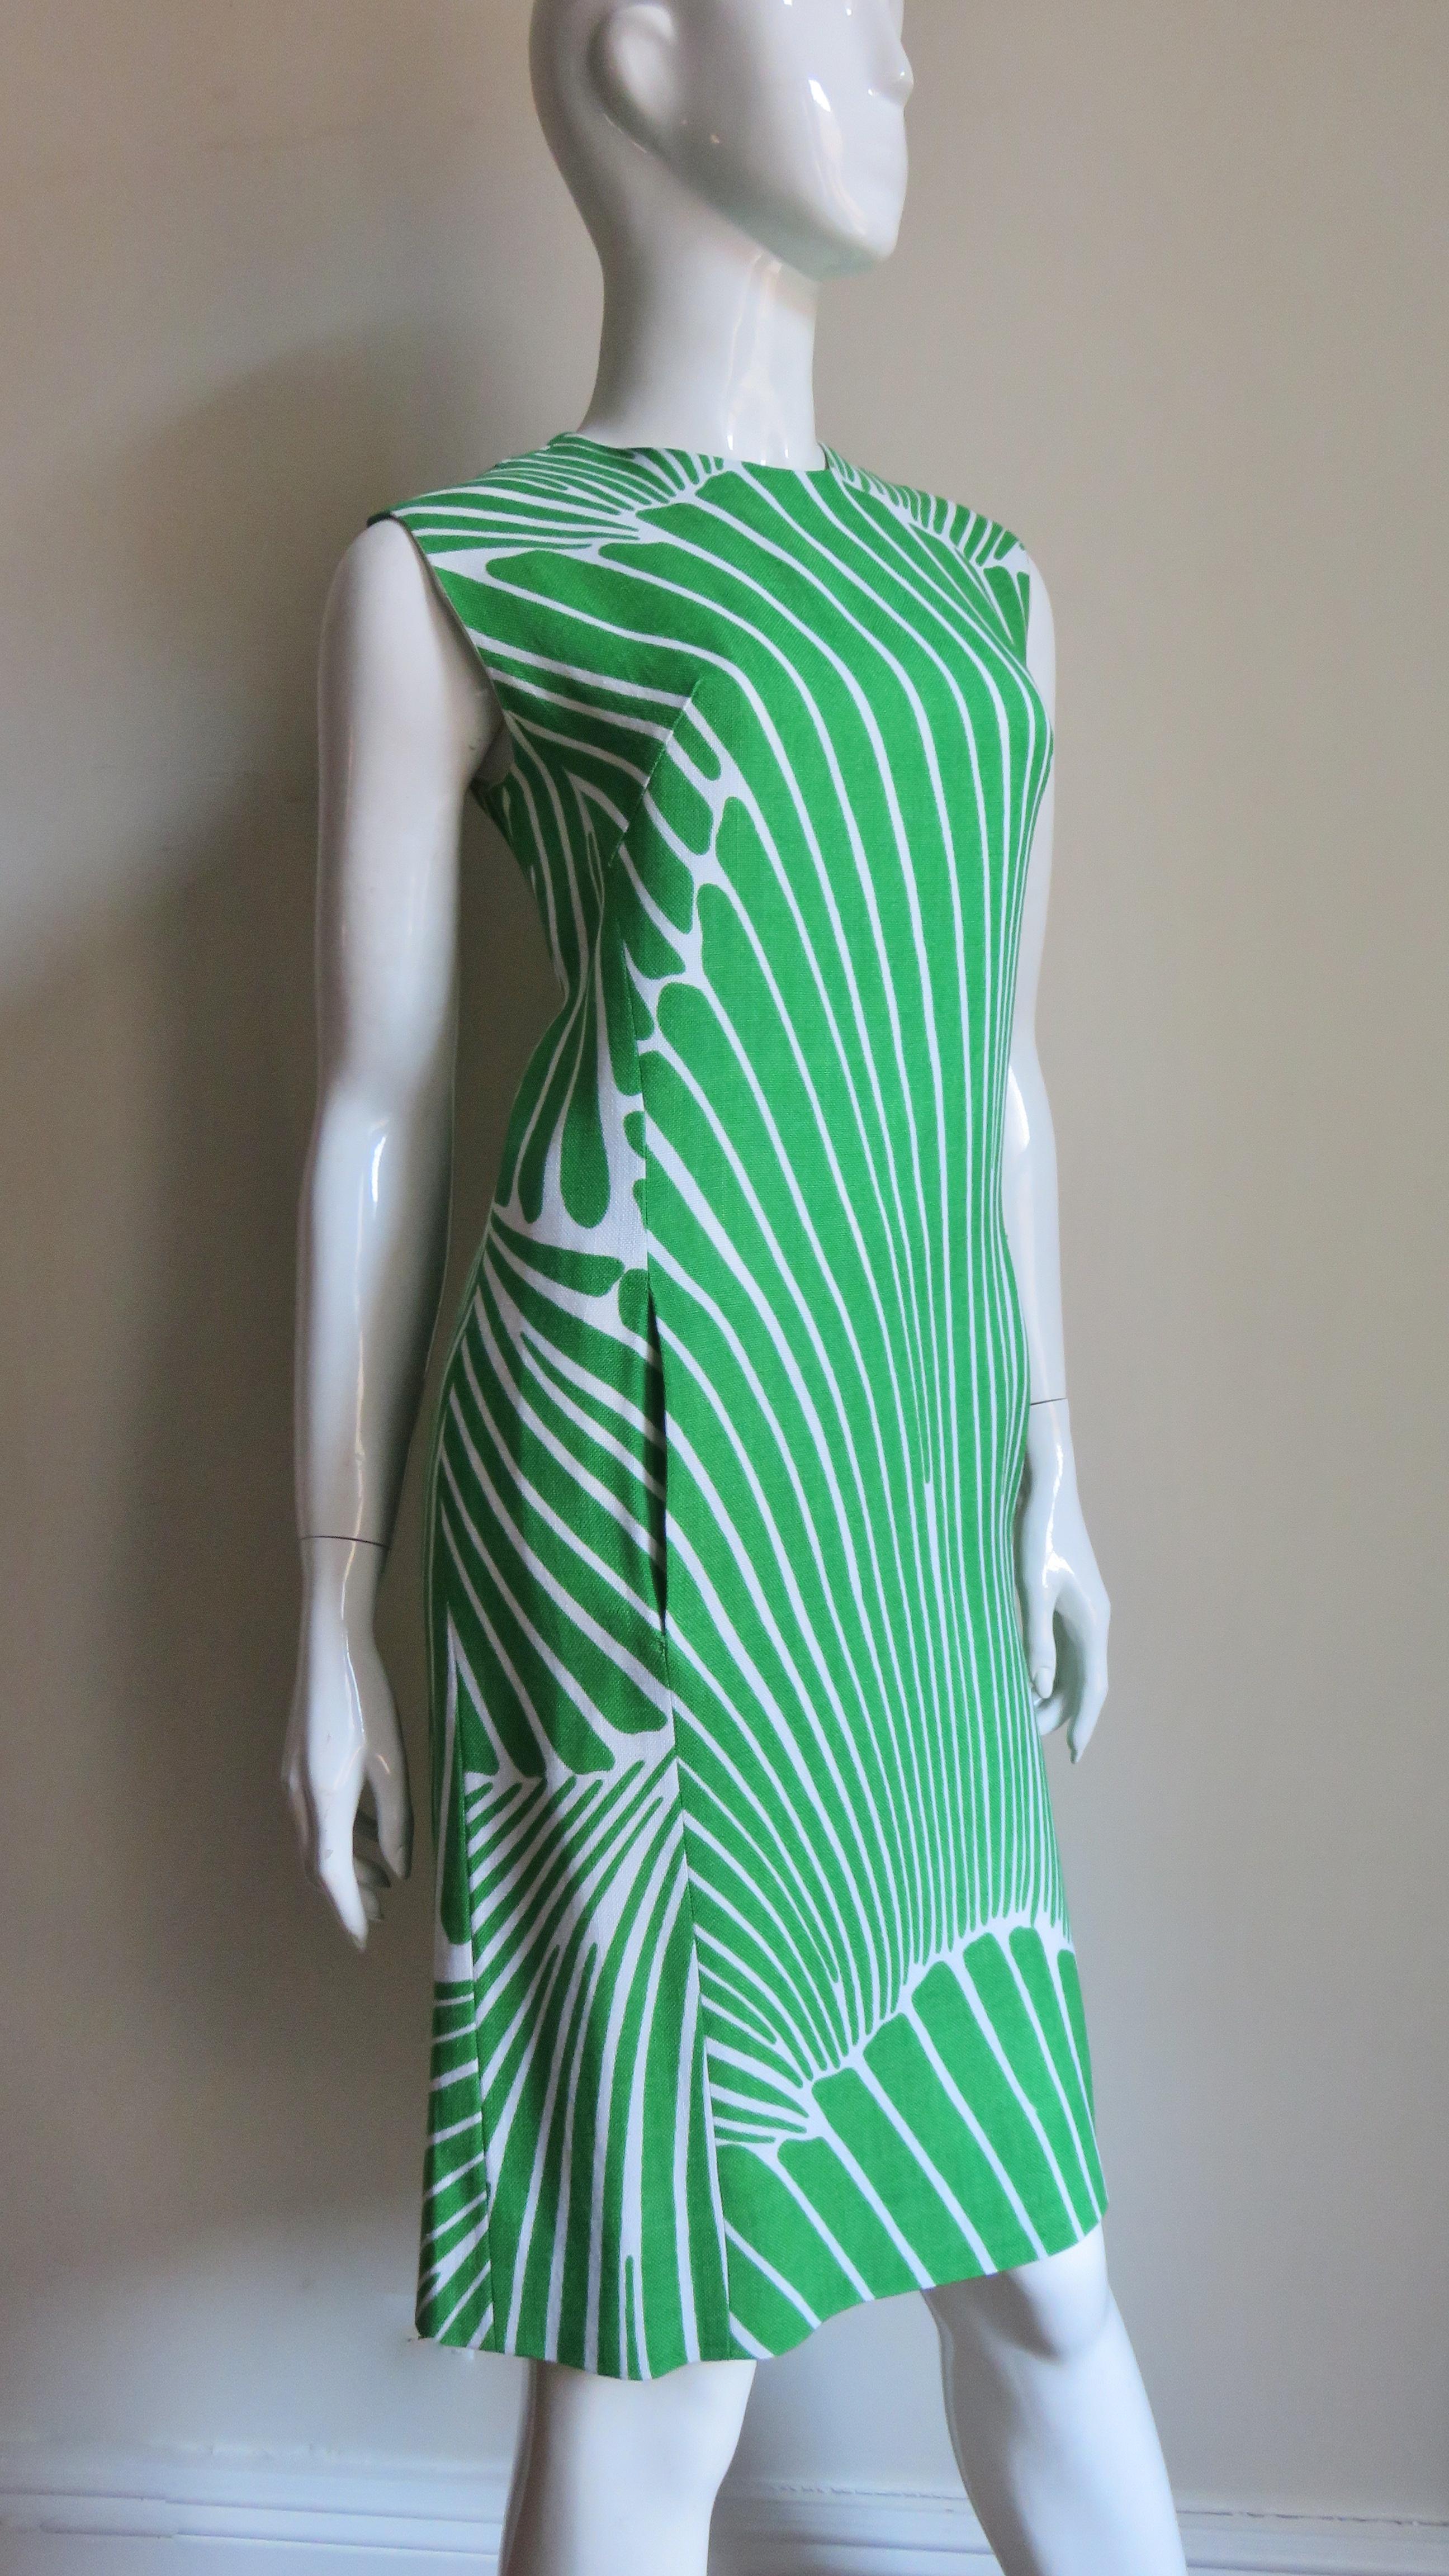  Gilbert Couture 1960s Geometric Dress and Coat 1